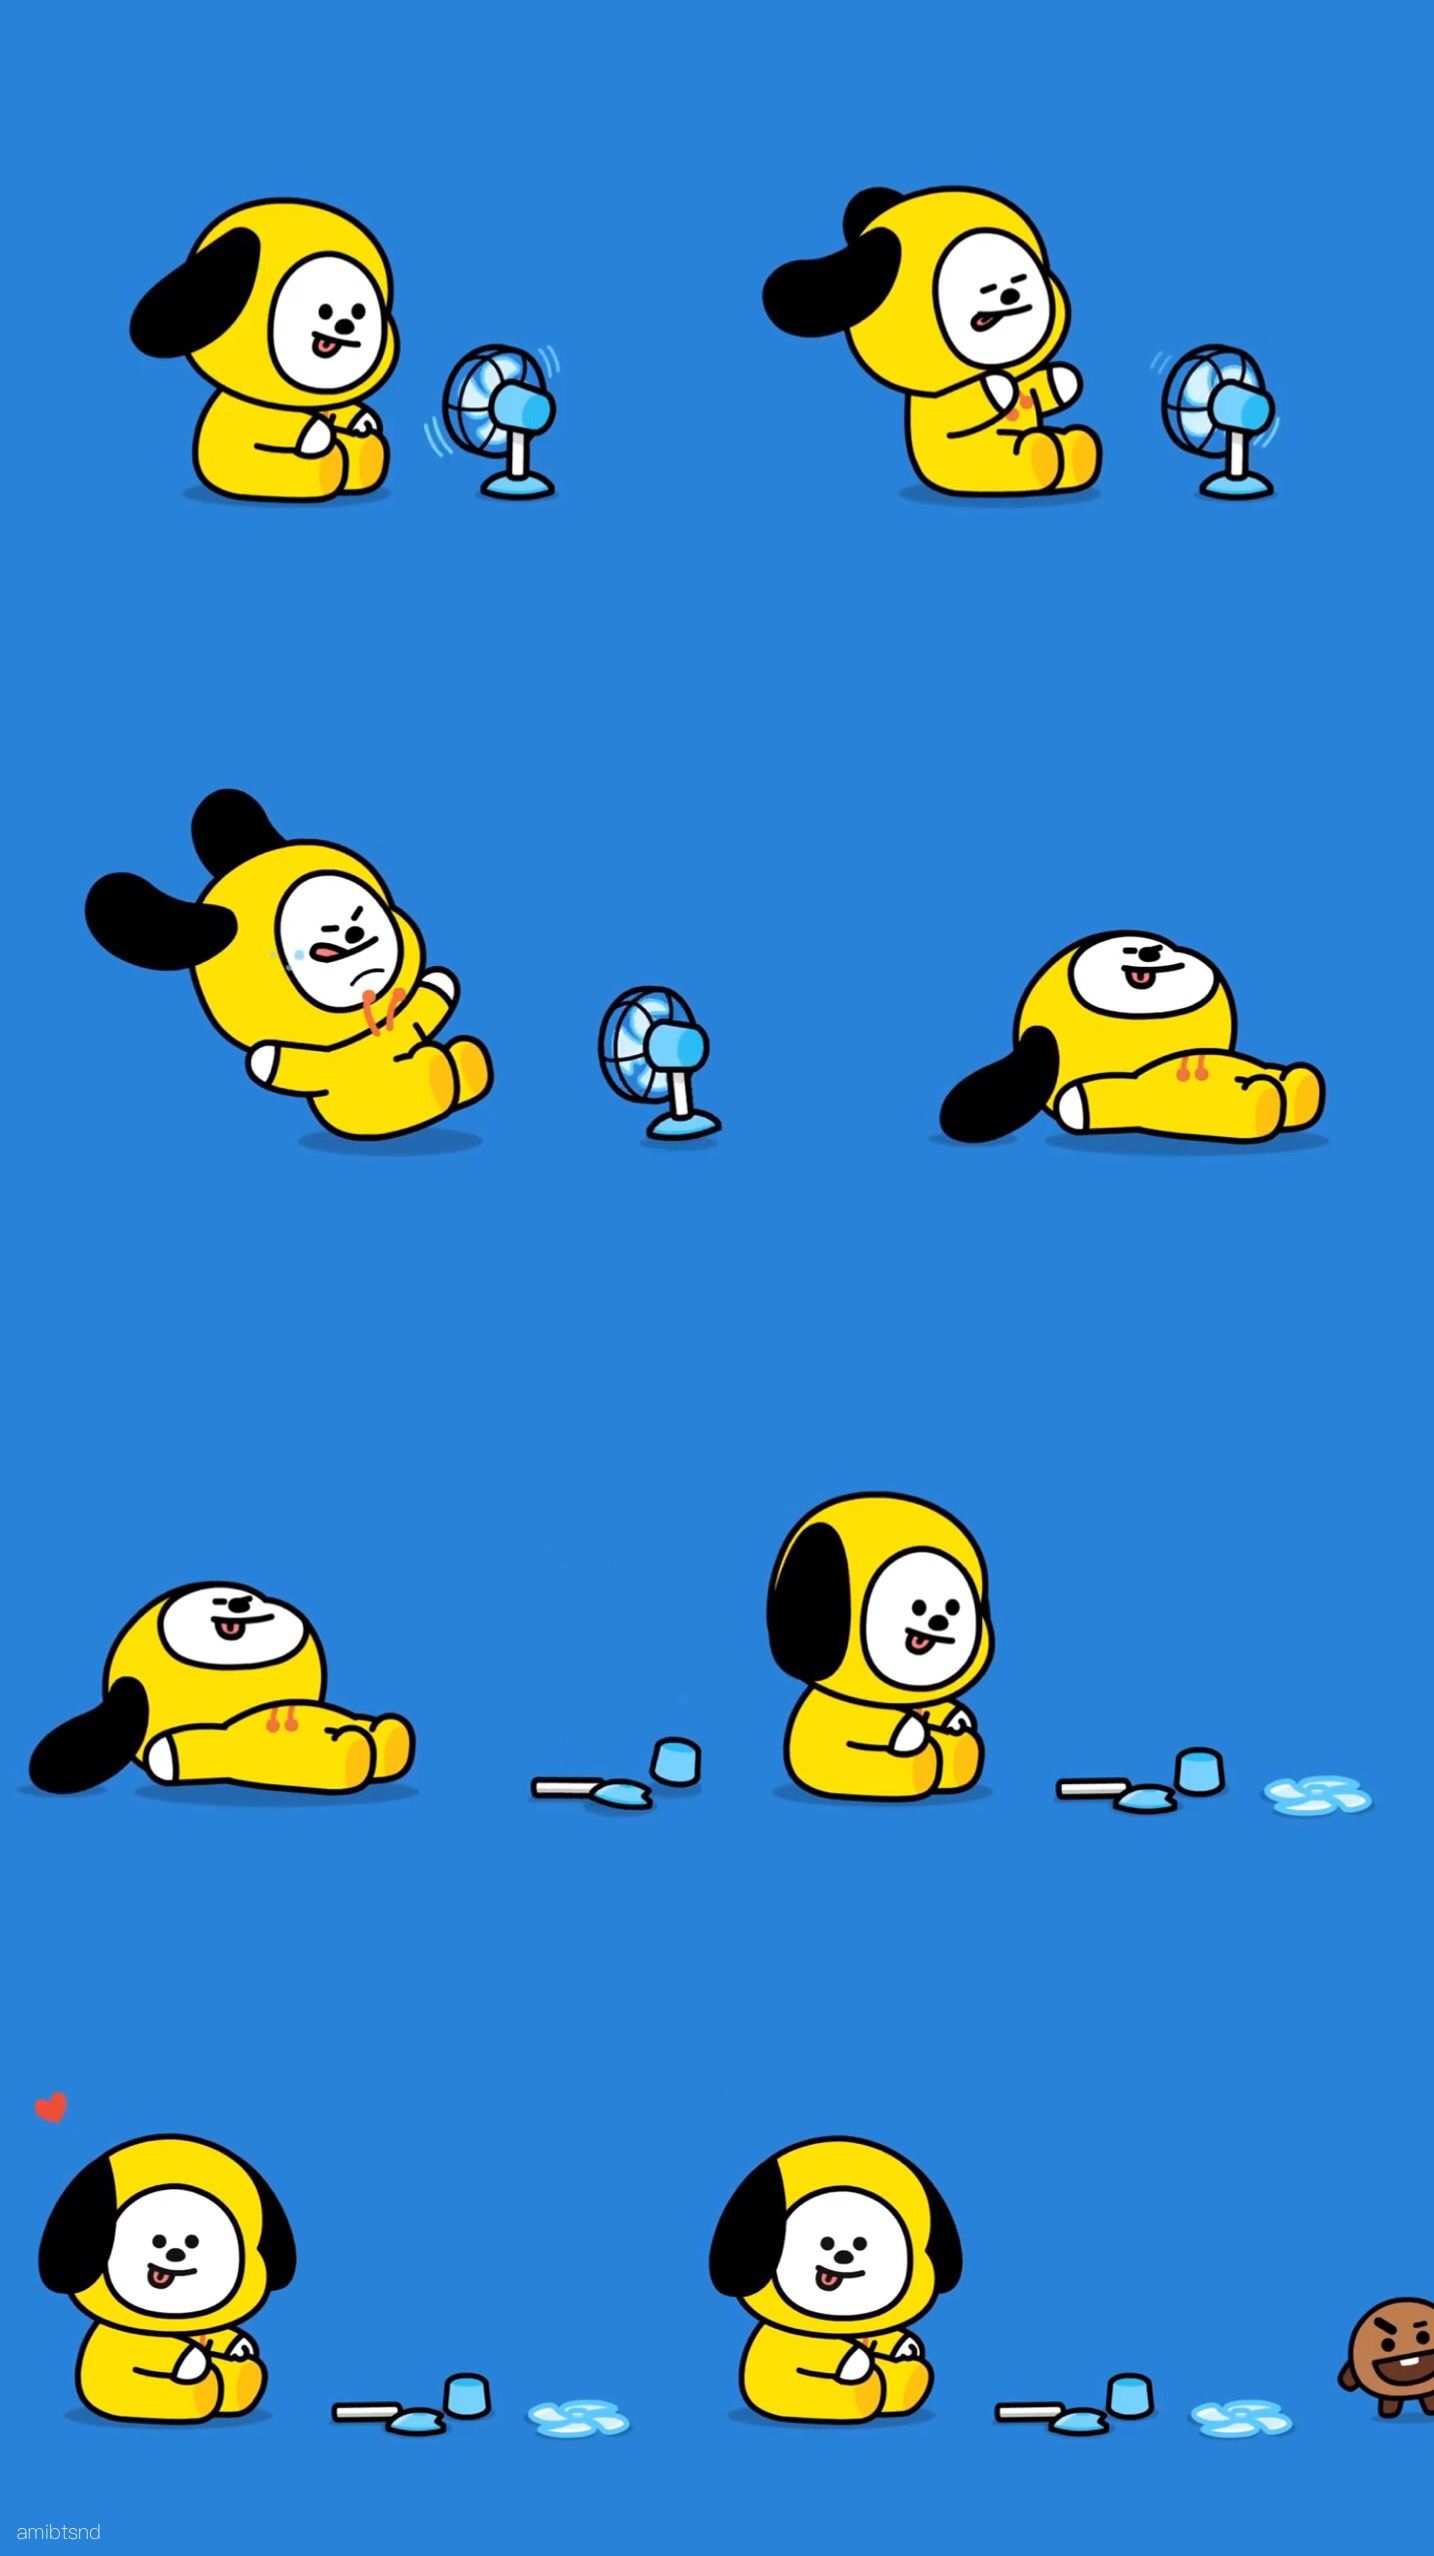 Chimmy Pictures Wallpapers